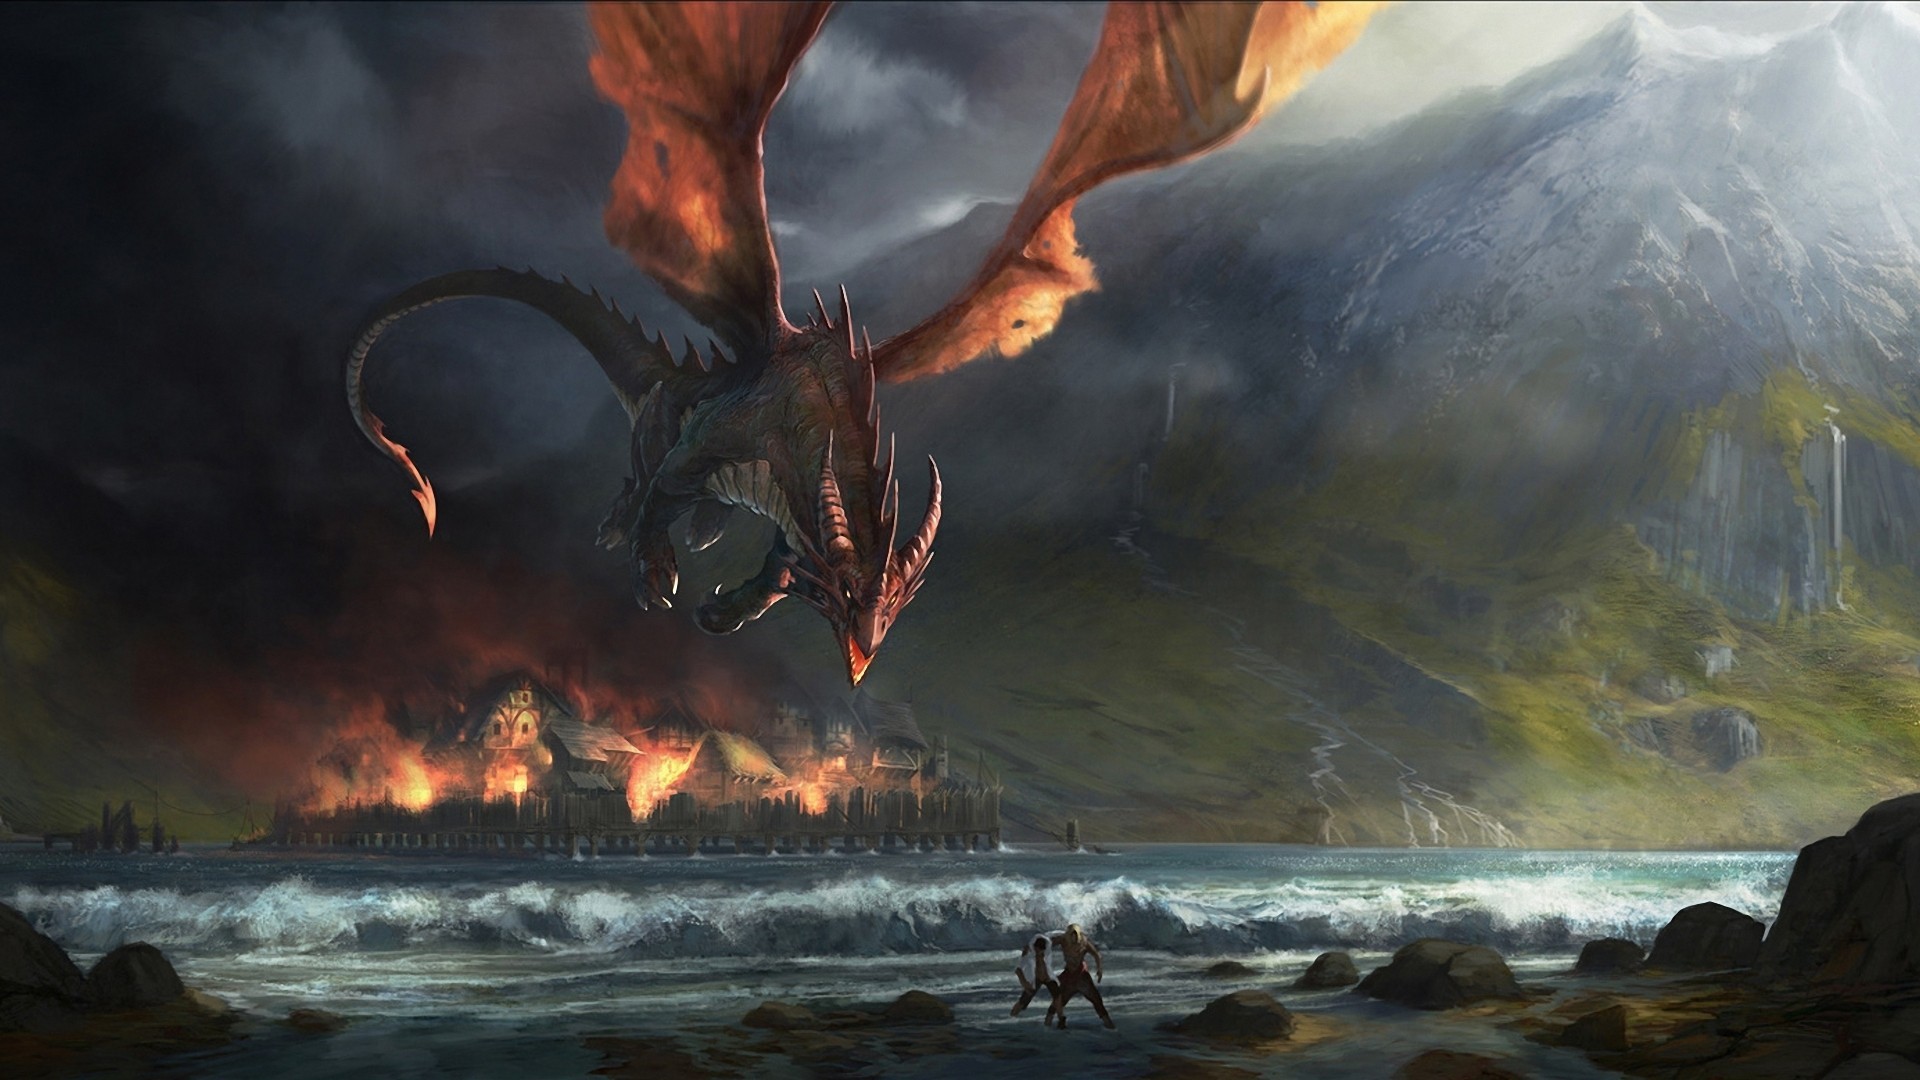 The Hobbit J R R Tolkien Fantasy Art Dragon Smaug The Lord Of The Rings Digital Art Sea The Hobbit T 1920x1080